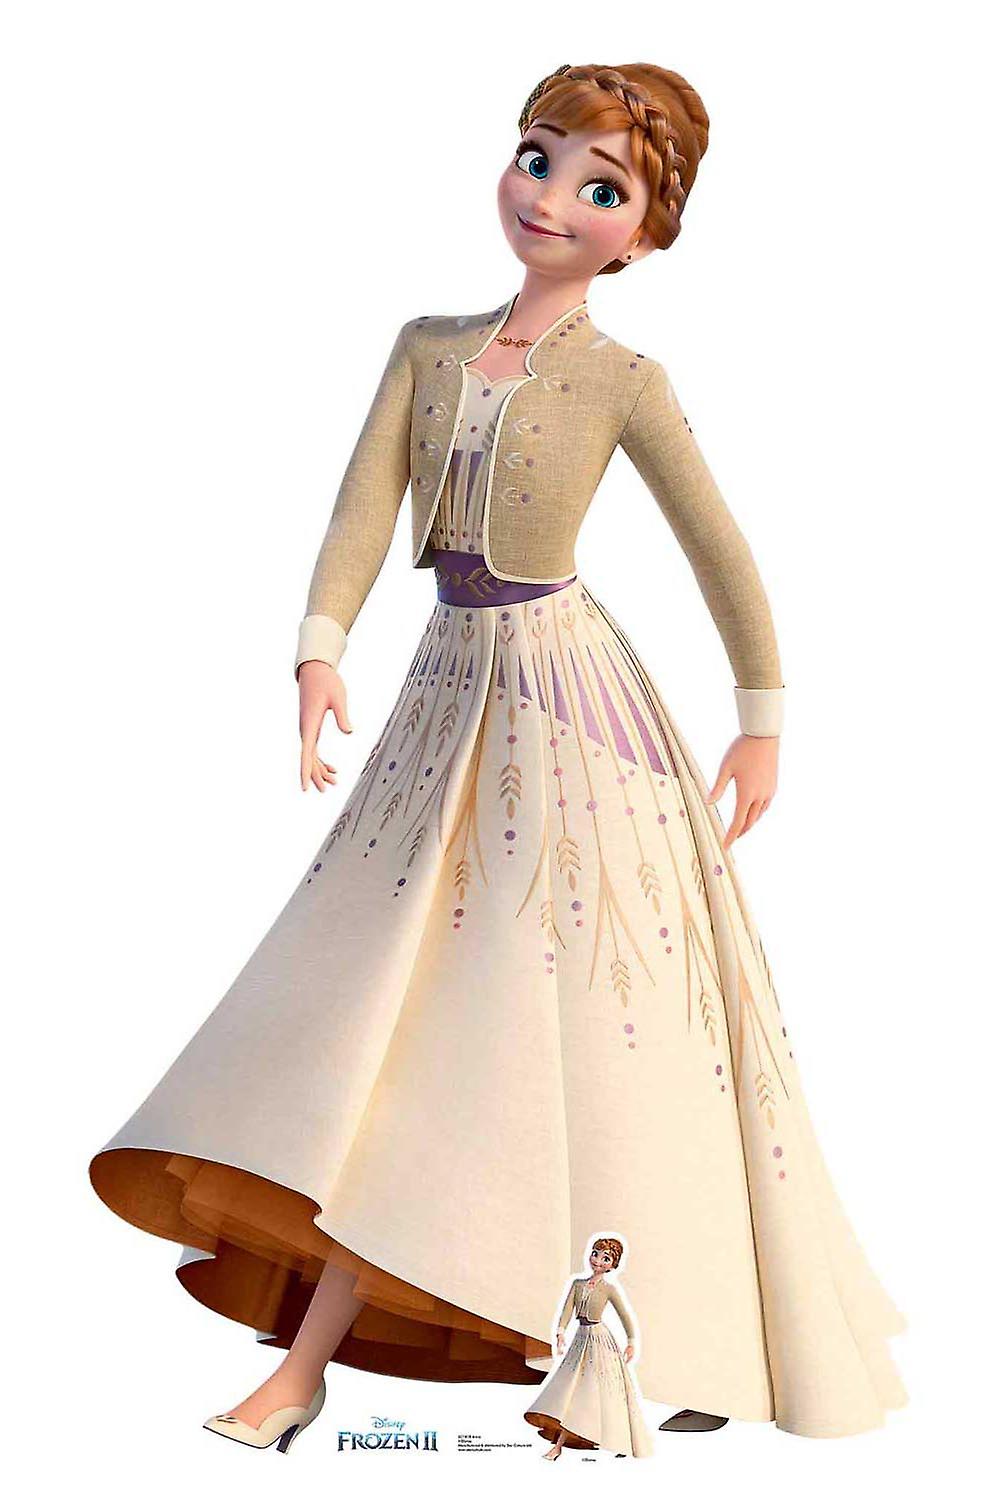 andre ramalho recommends images of anna from frozen 2 pic